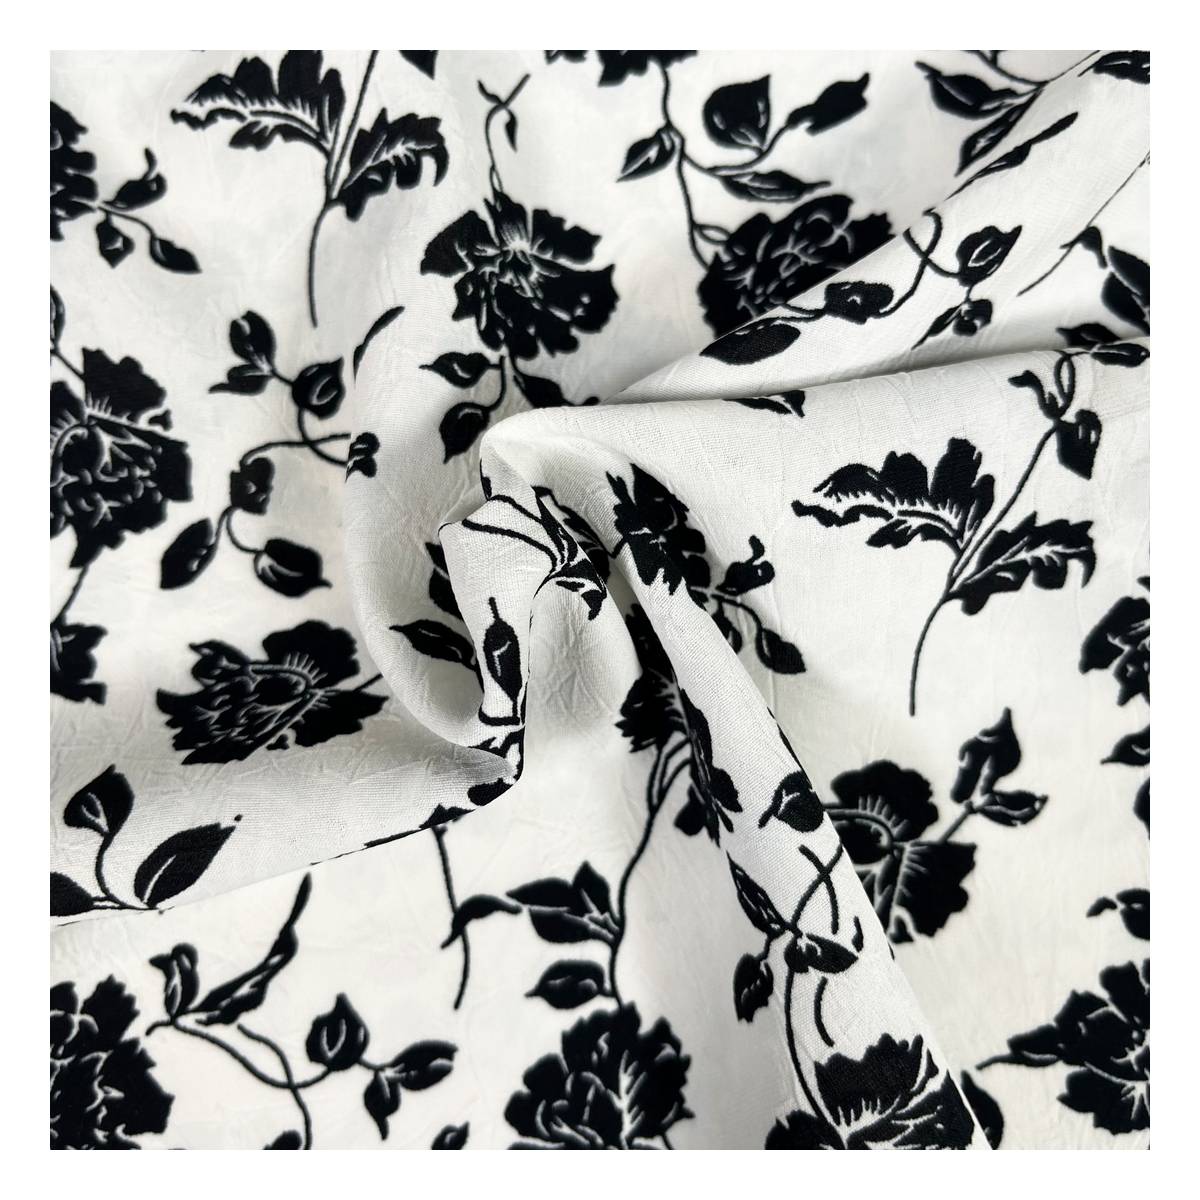 Cotton Fabric Black & White Floral Print Craft Fabric Material